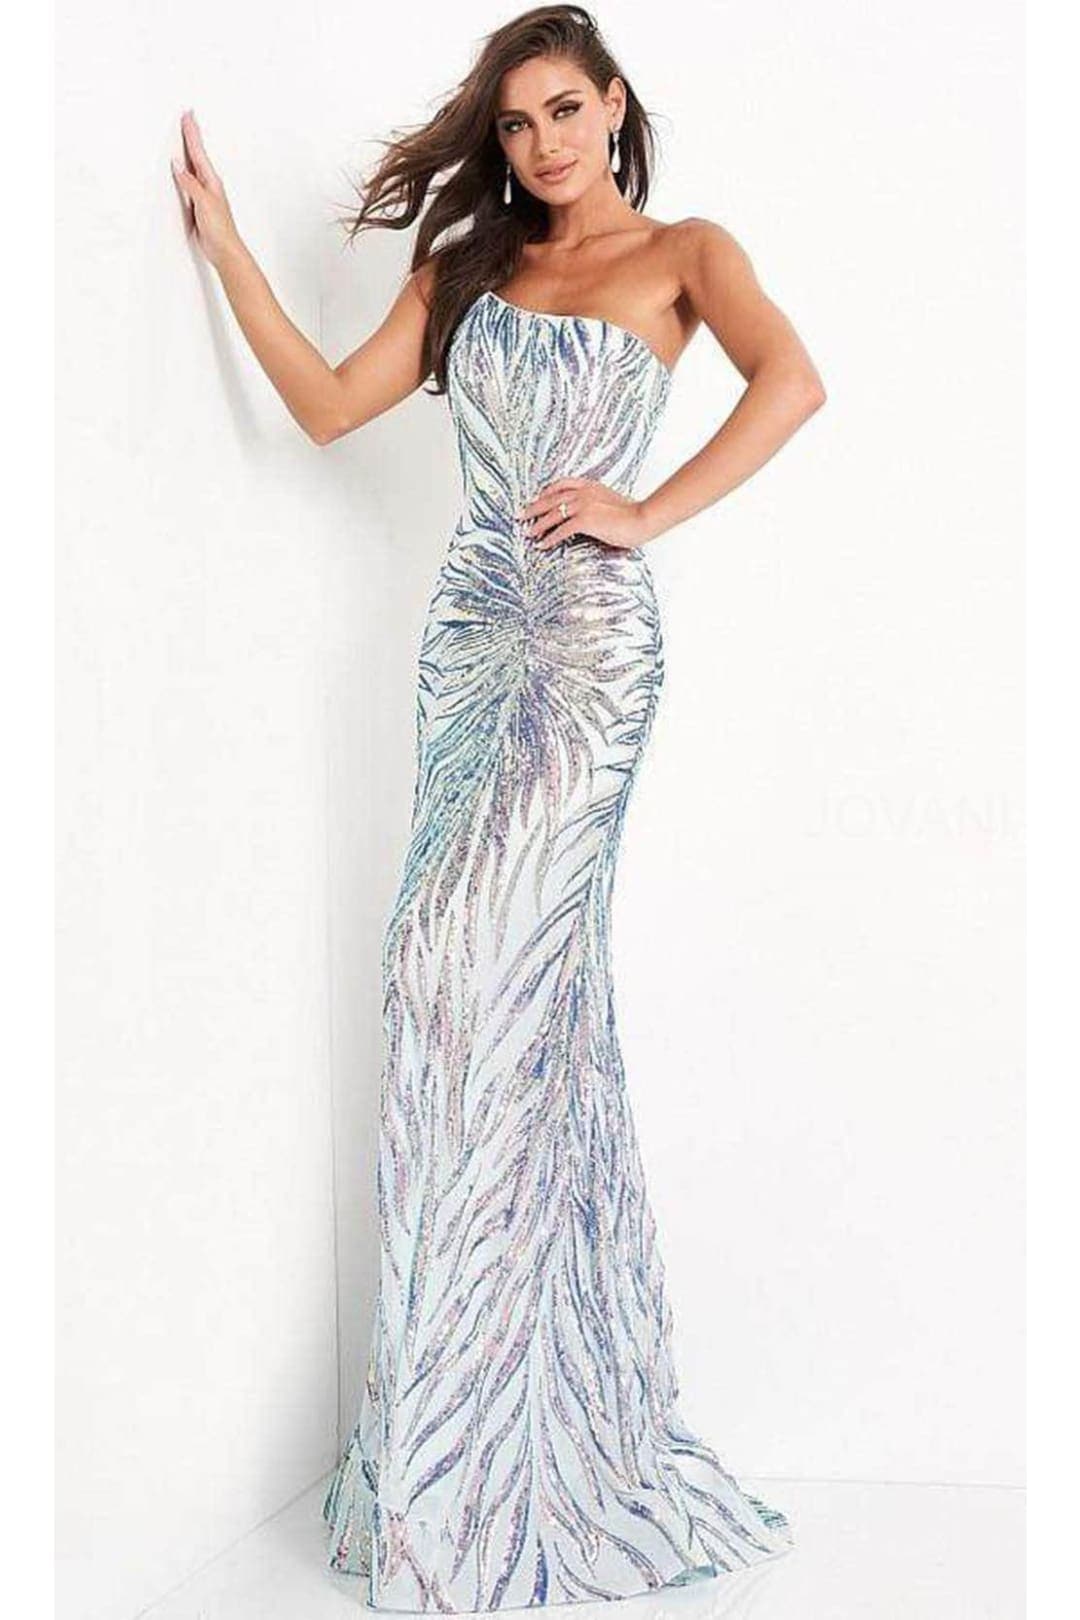 Jovani 05664 One Shoulder Iridescent Sequin Fitted Prom Dress - MINT/MULTI / 00 - Dress